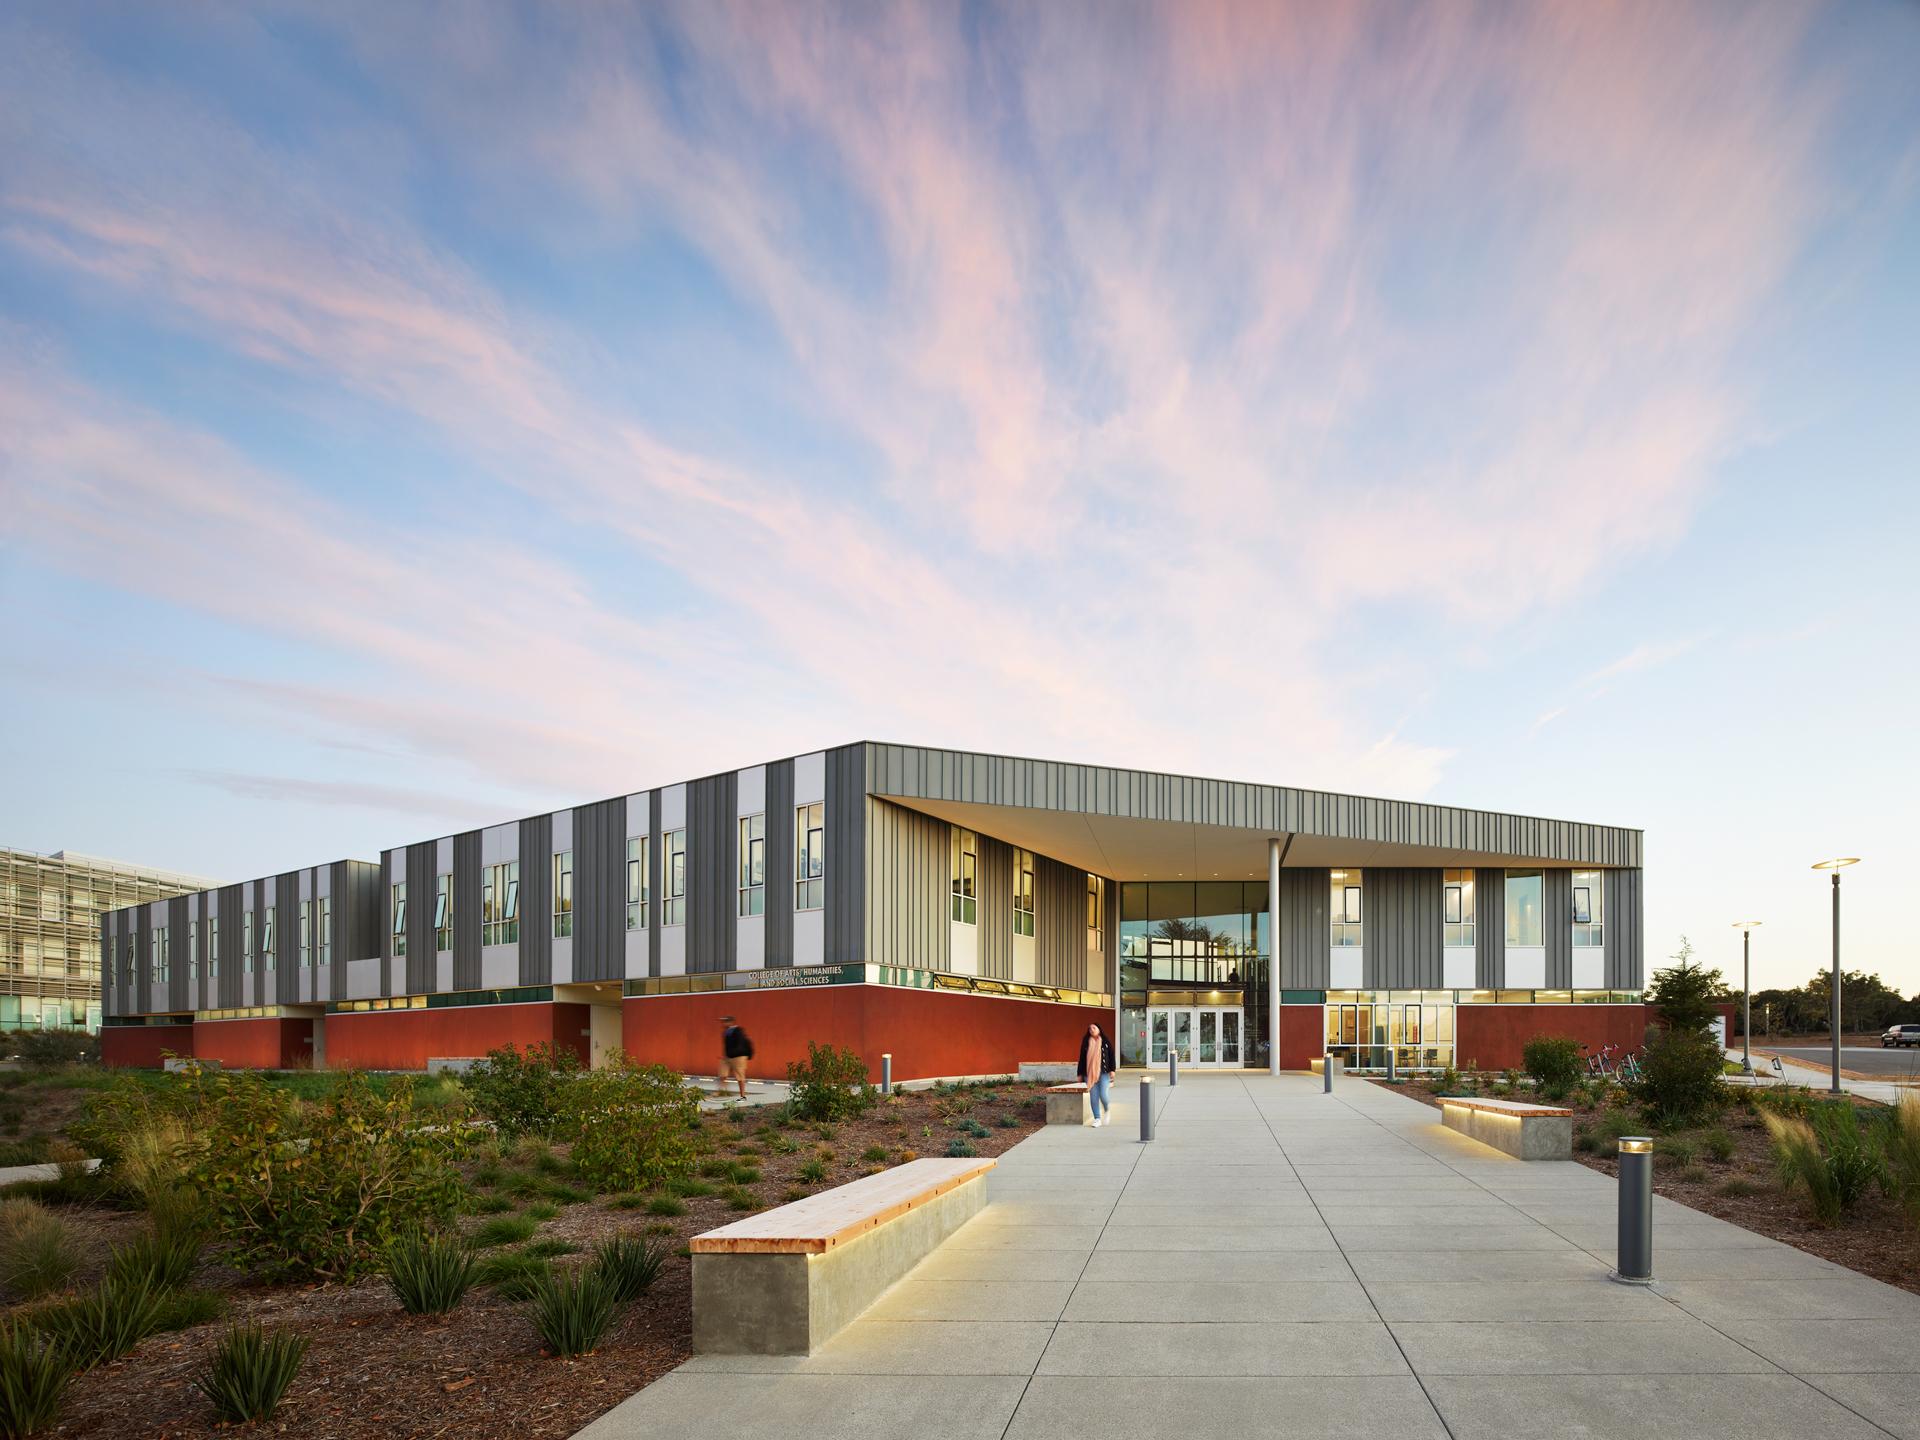 California State University, Monterey Bay, College of Arts, Humanities & Social Sciences Building